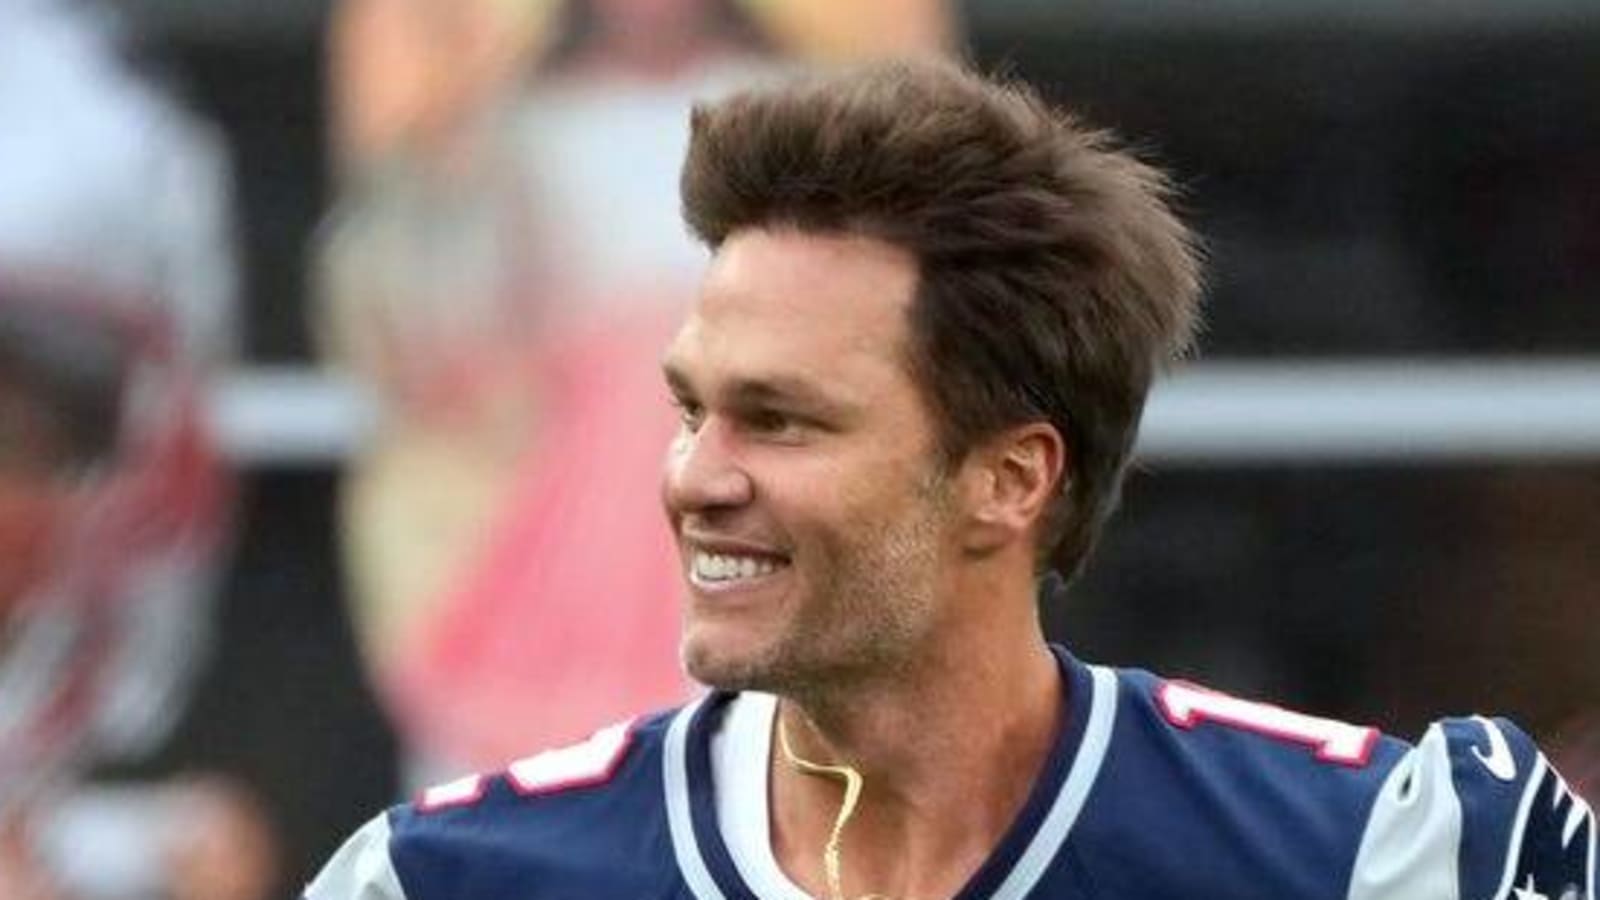 Brady addresses coming out of retirement amid Patriots' struggles